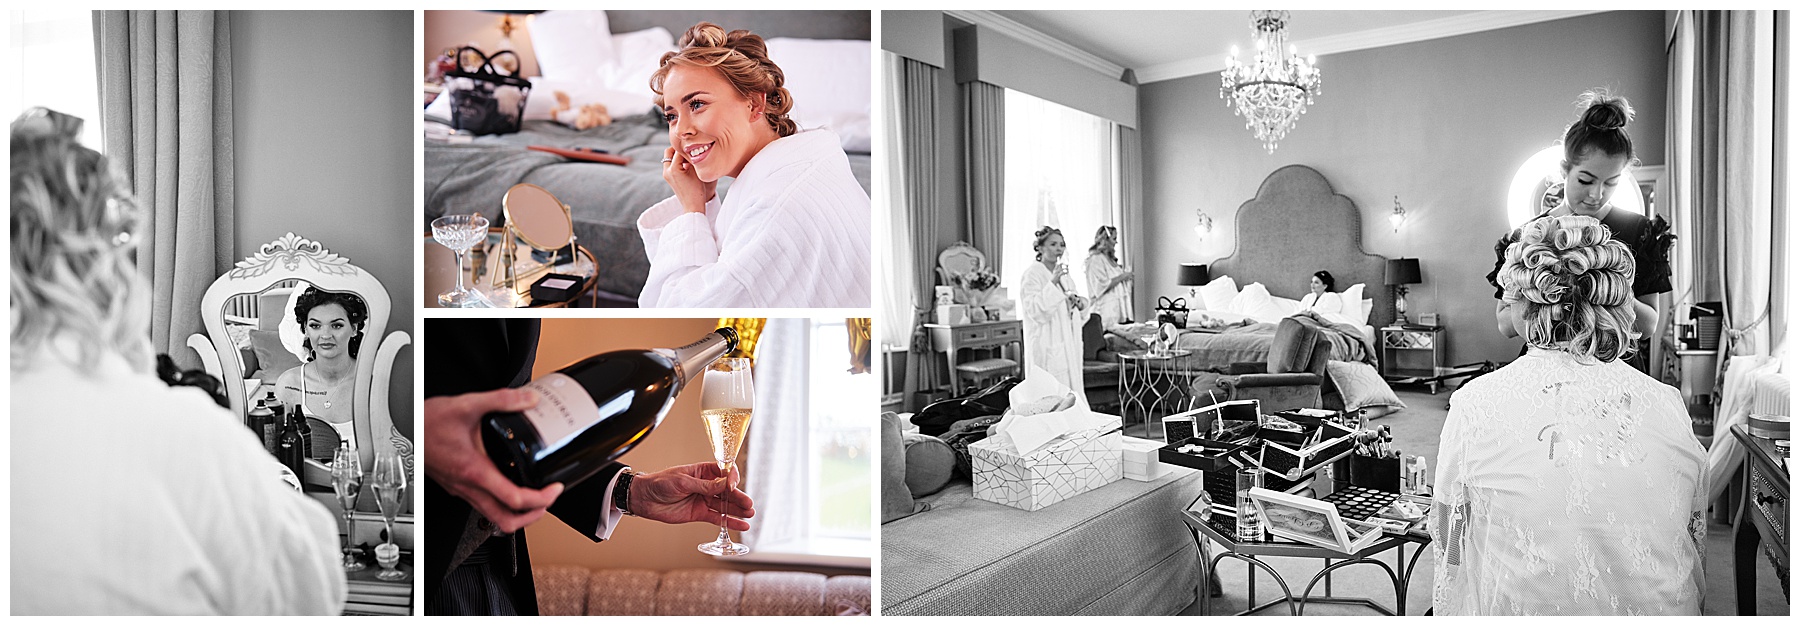 Capturing the relaxed mood during the bridal party preparations at Hawkstone Hall